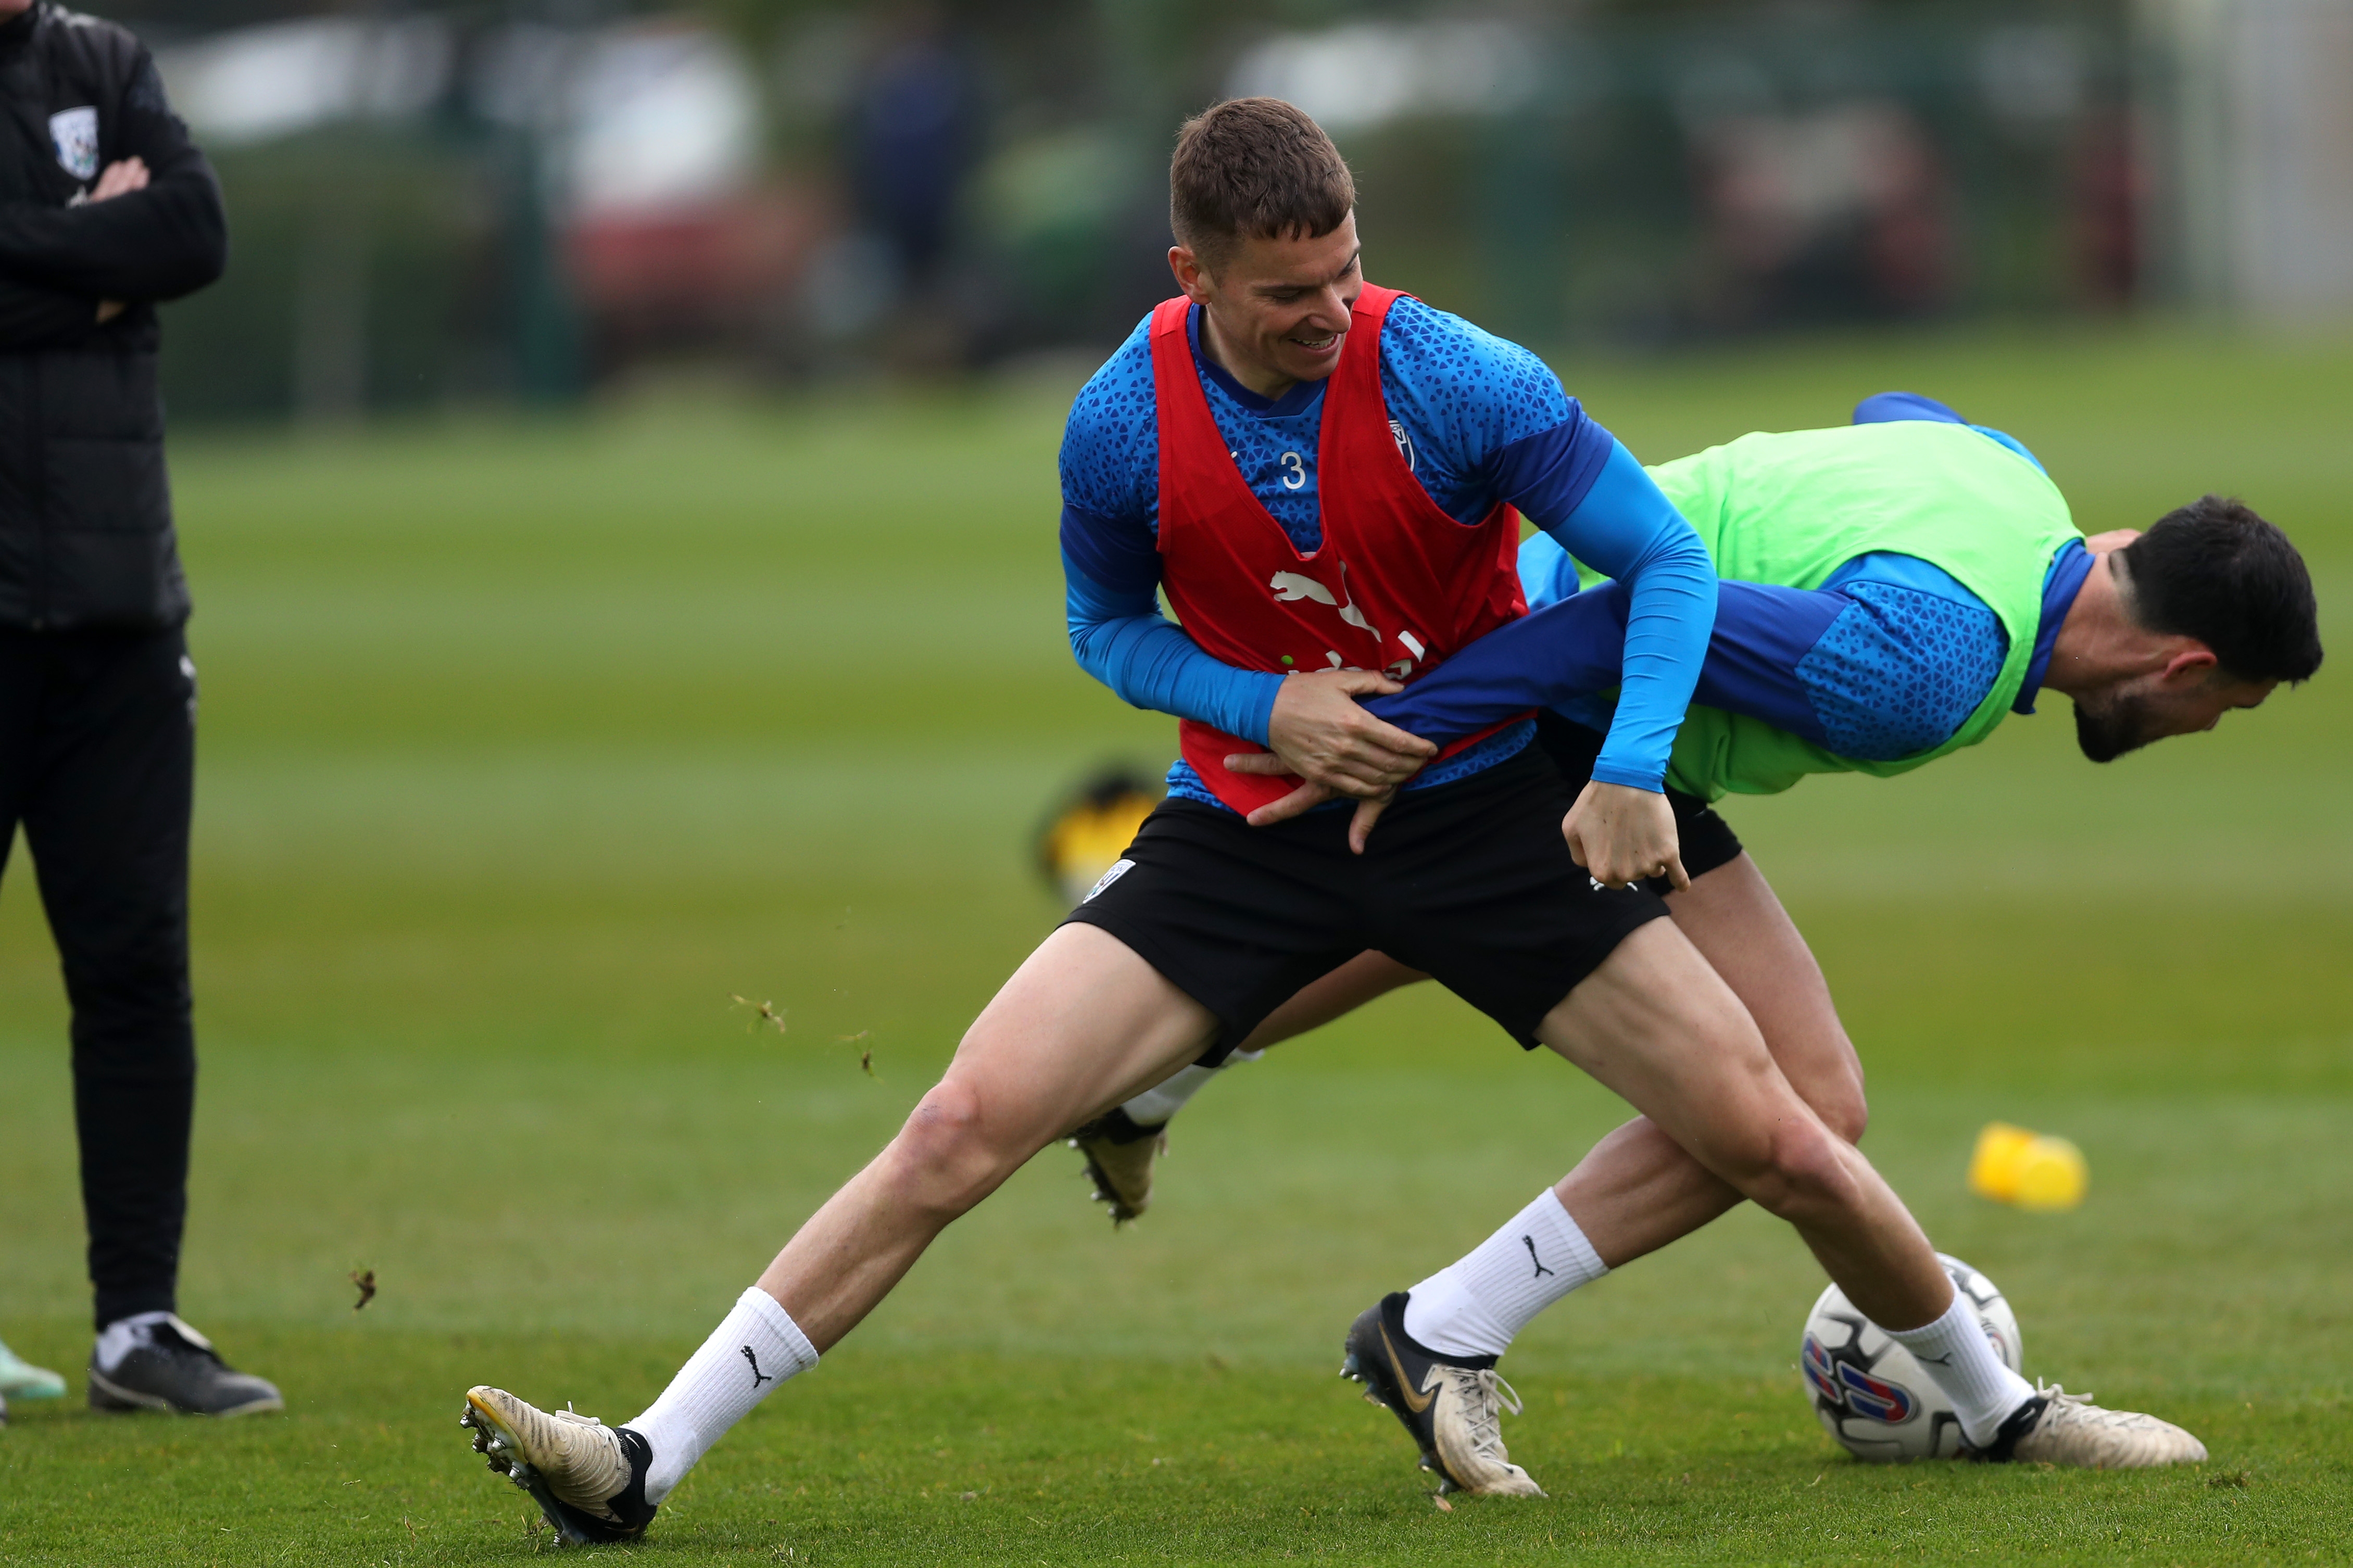 Conor Townsend and Alex Mowatt fighting for the ball during a training session 